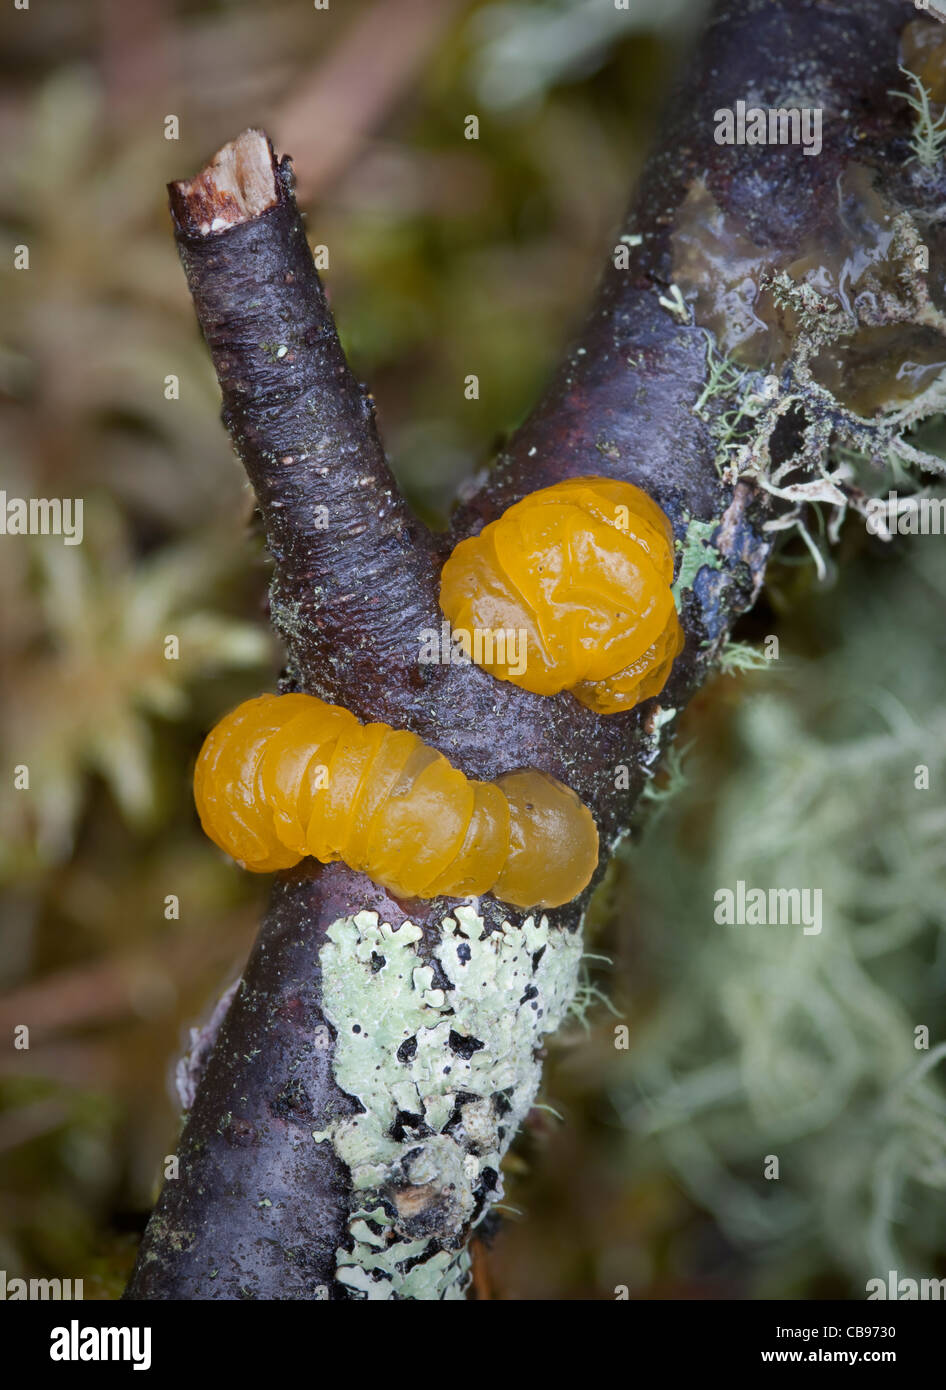 Yellow Jelly Fungus on decaying birch branch, Cairngorms, Scotland Stock Photo